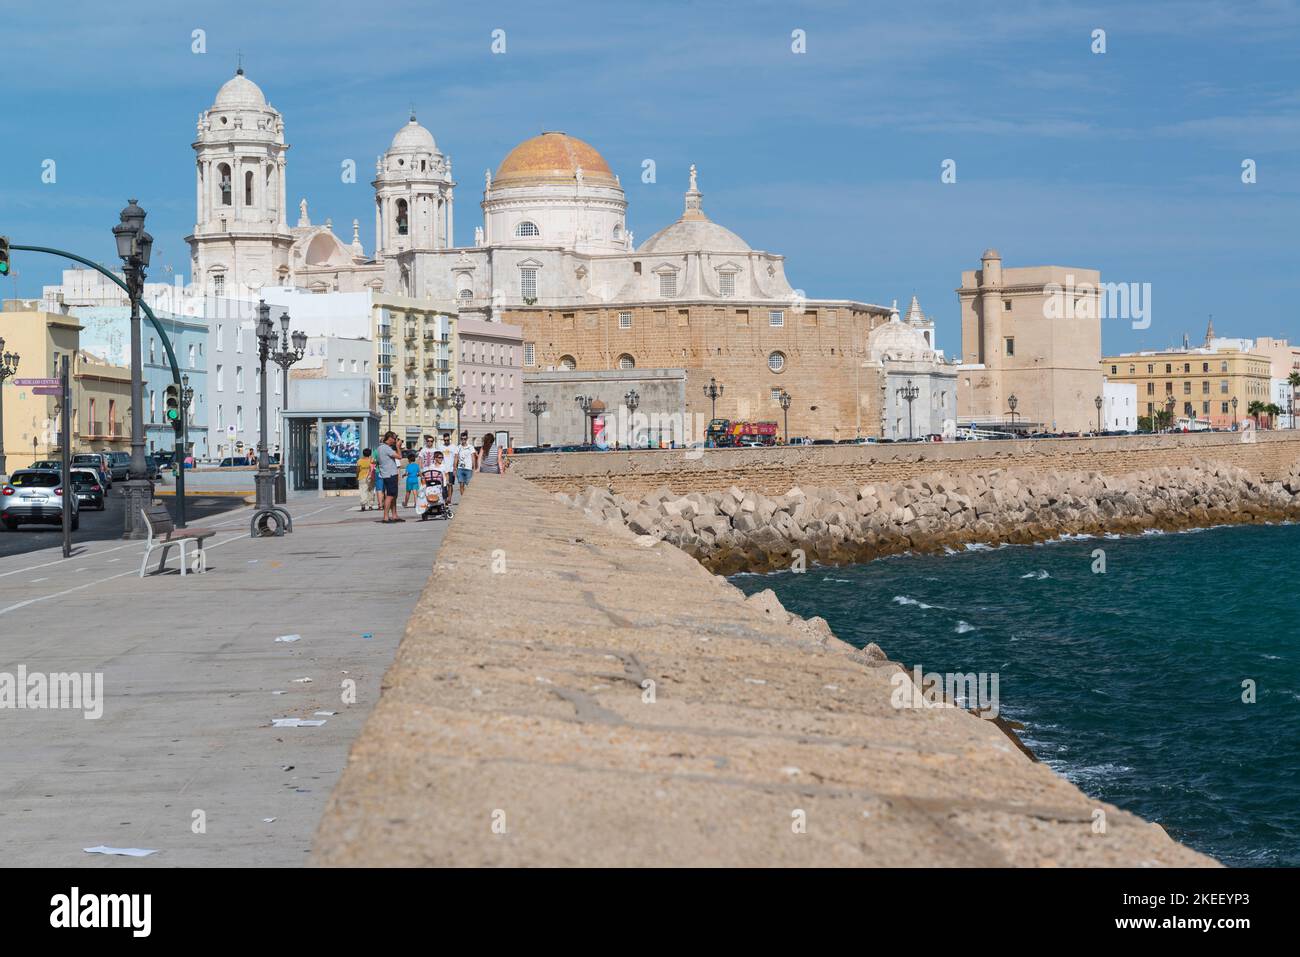 Promenade along the seafront with the Catedral de Cadiz in the background. Cadiz, Andalusia province, Spain Stock Photo